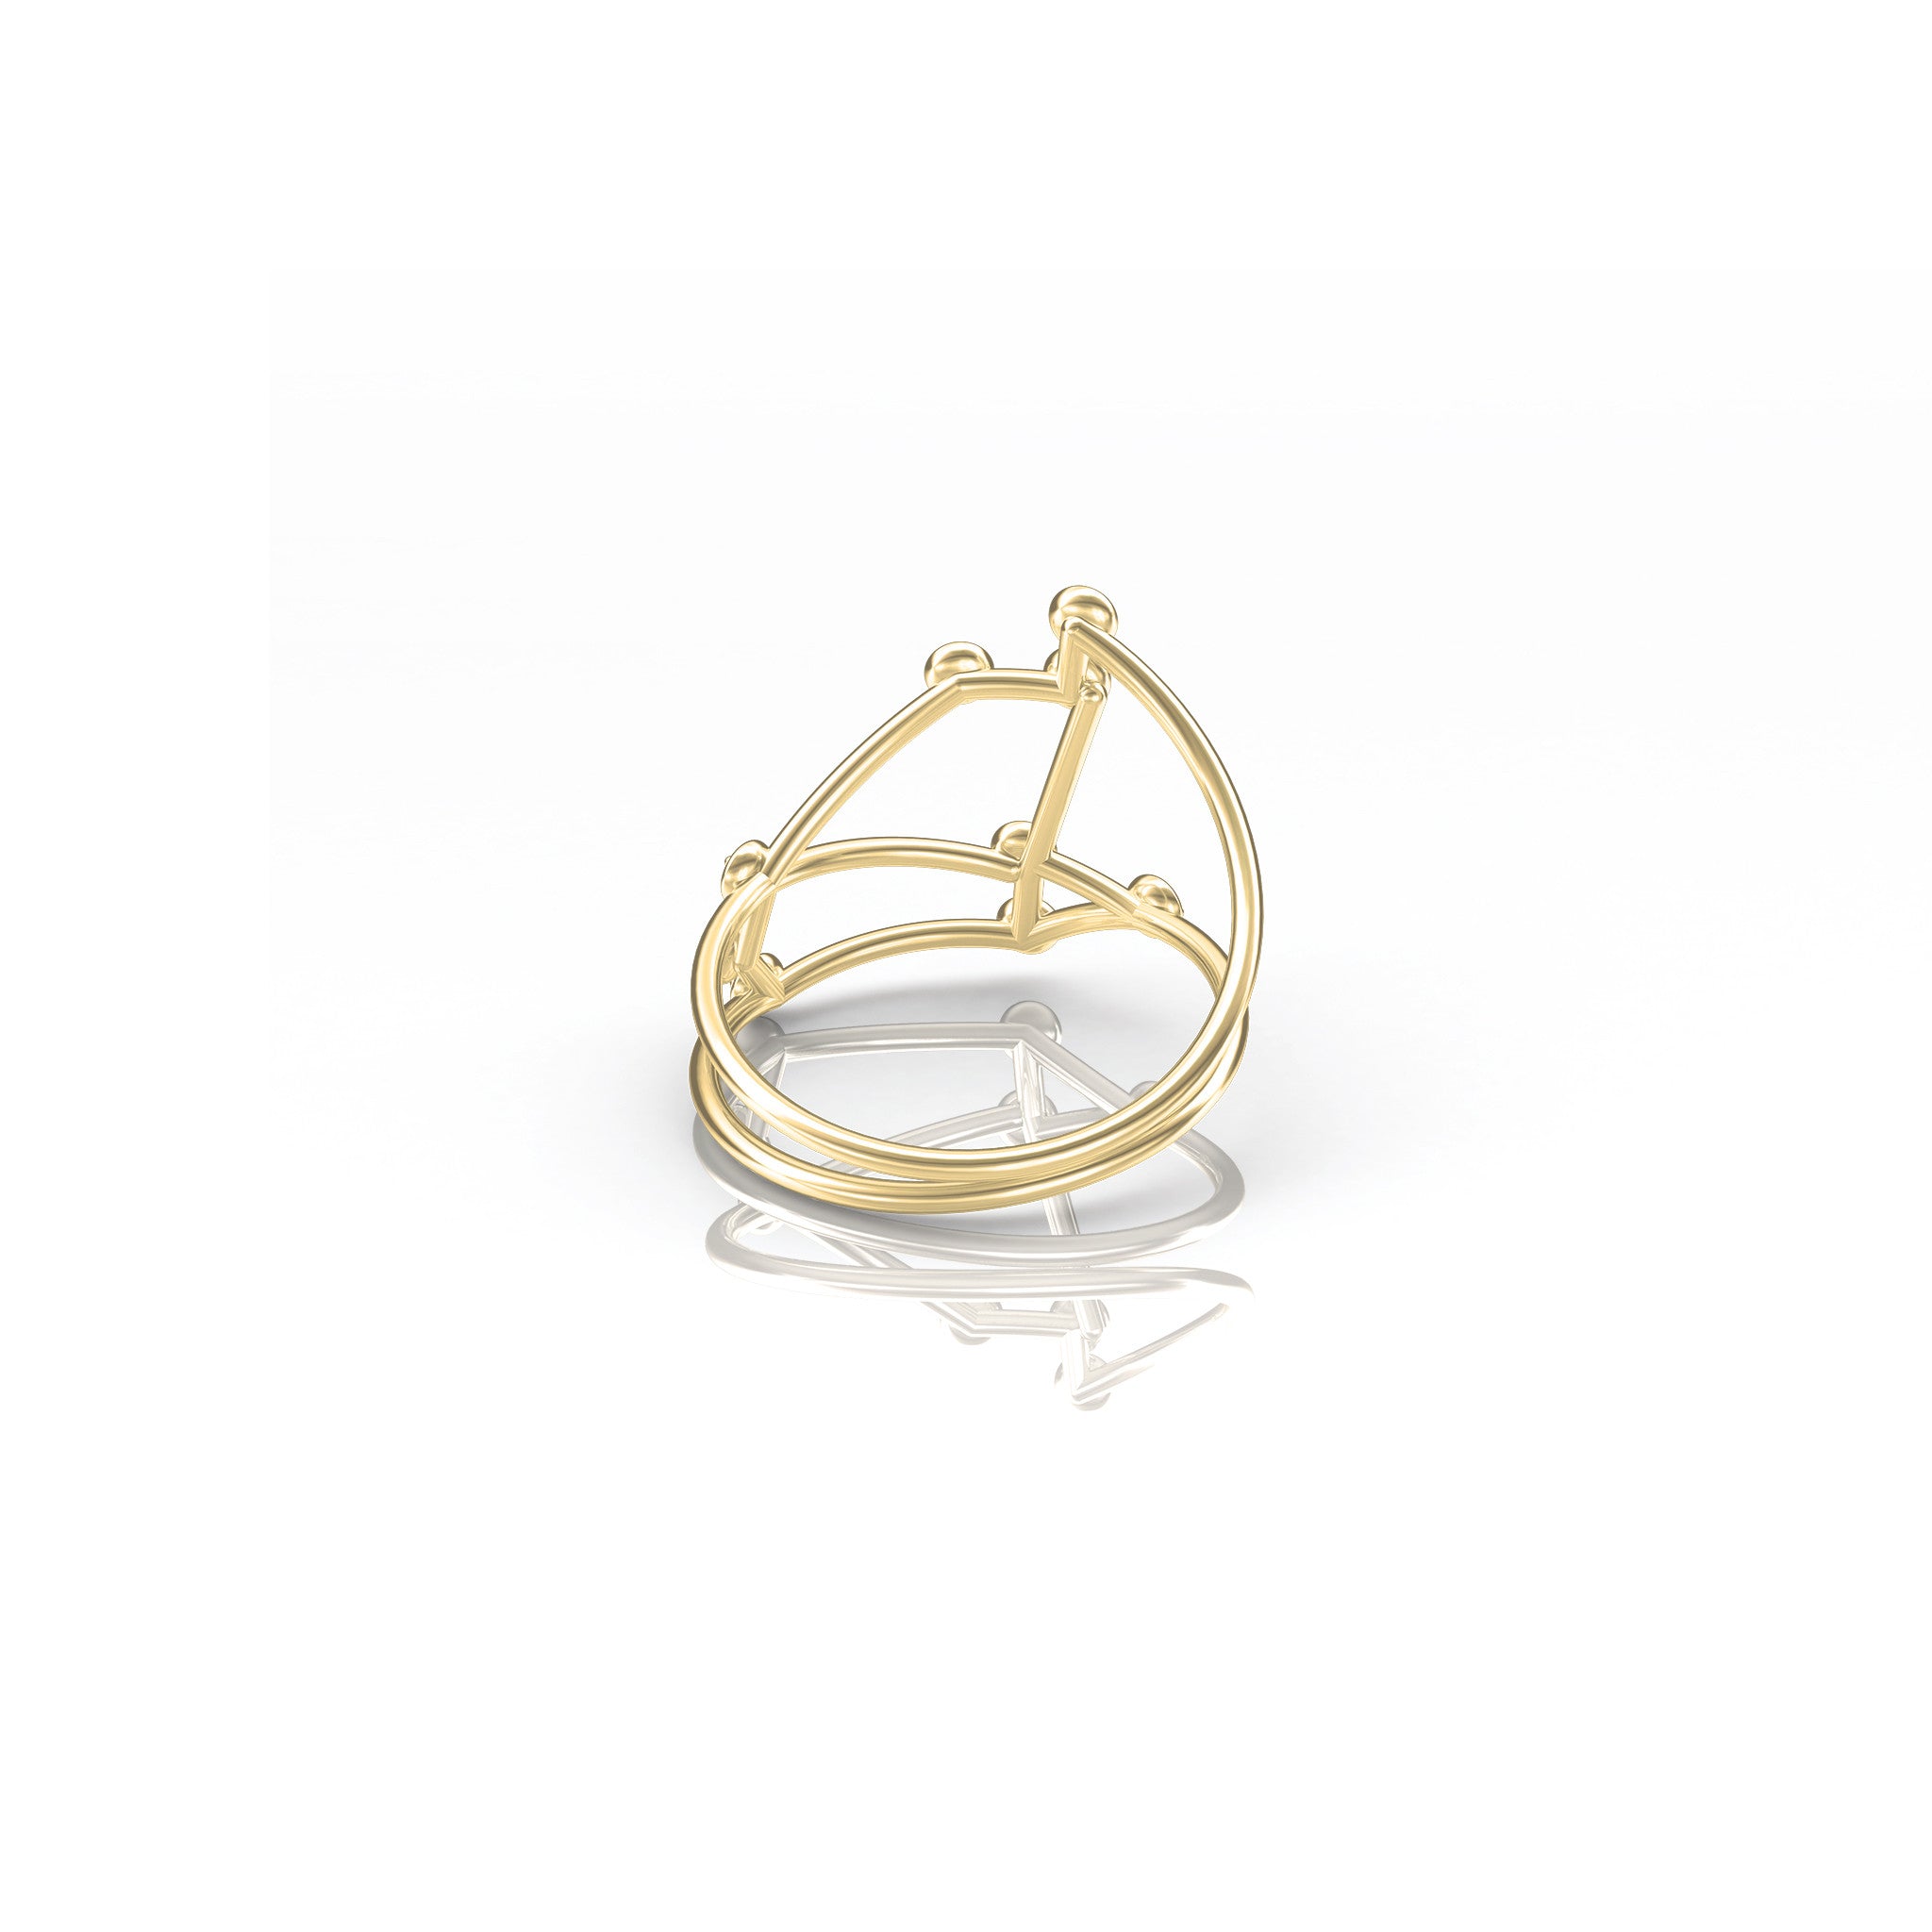 IN STOCK 18ct Yellow Gold Aries Constellation Ring